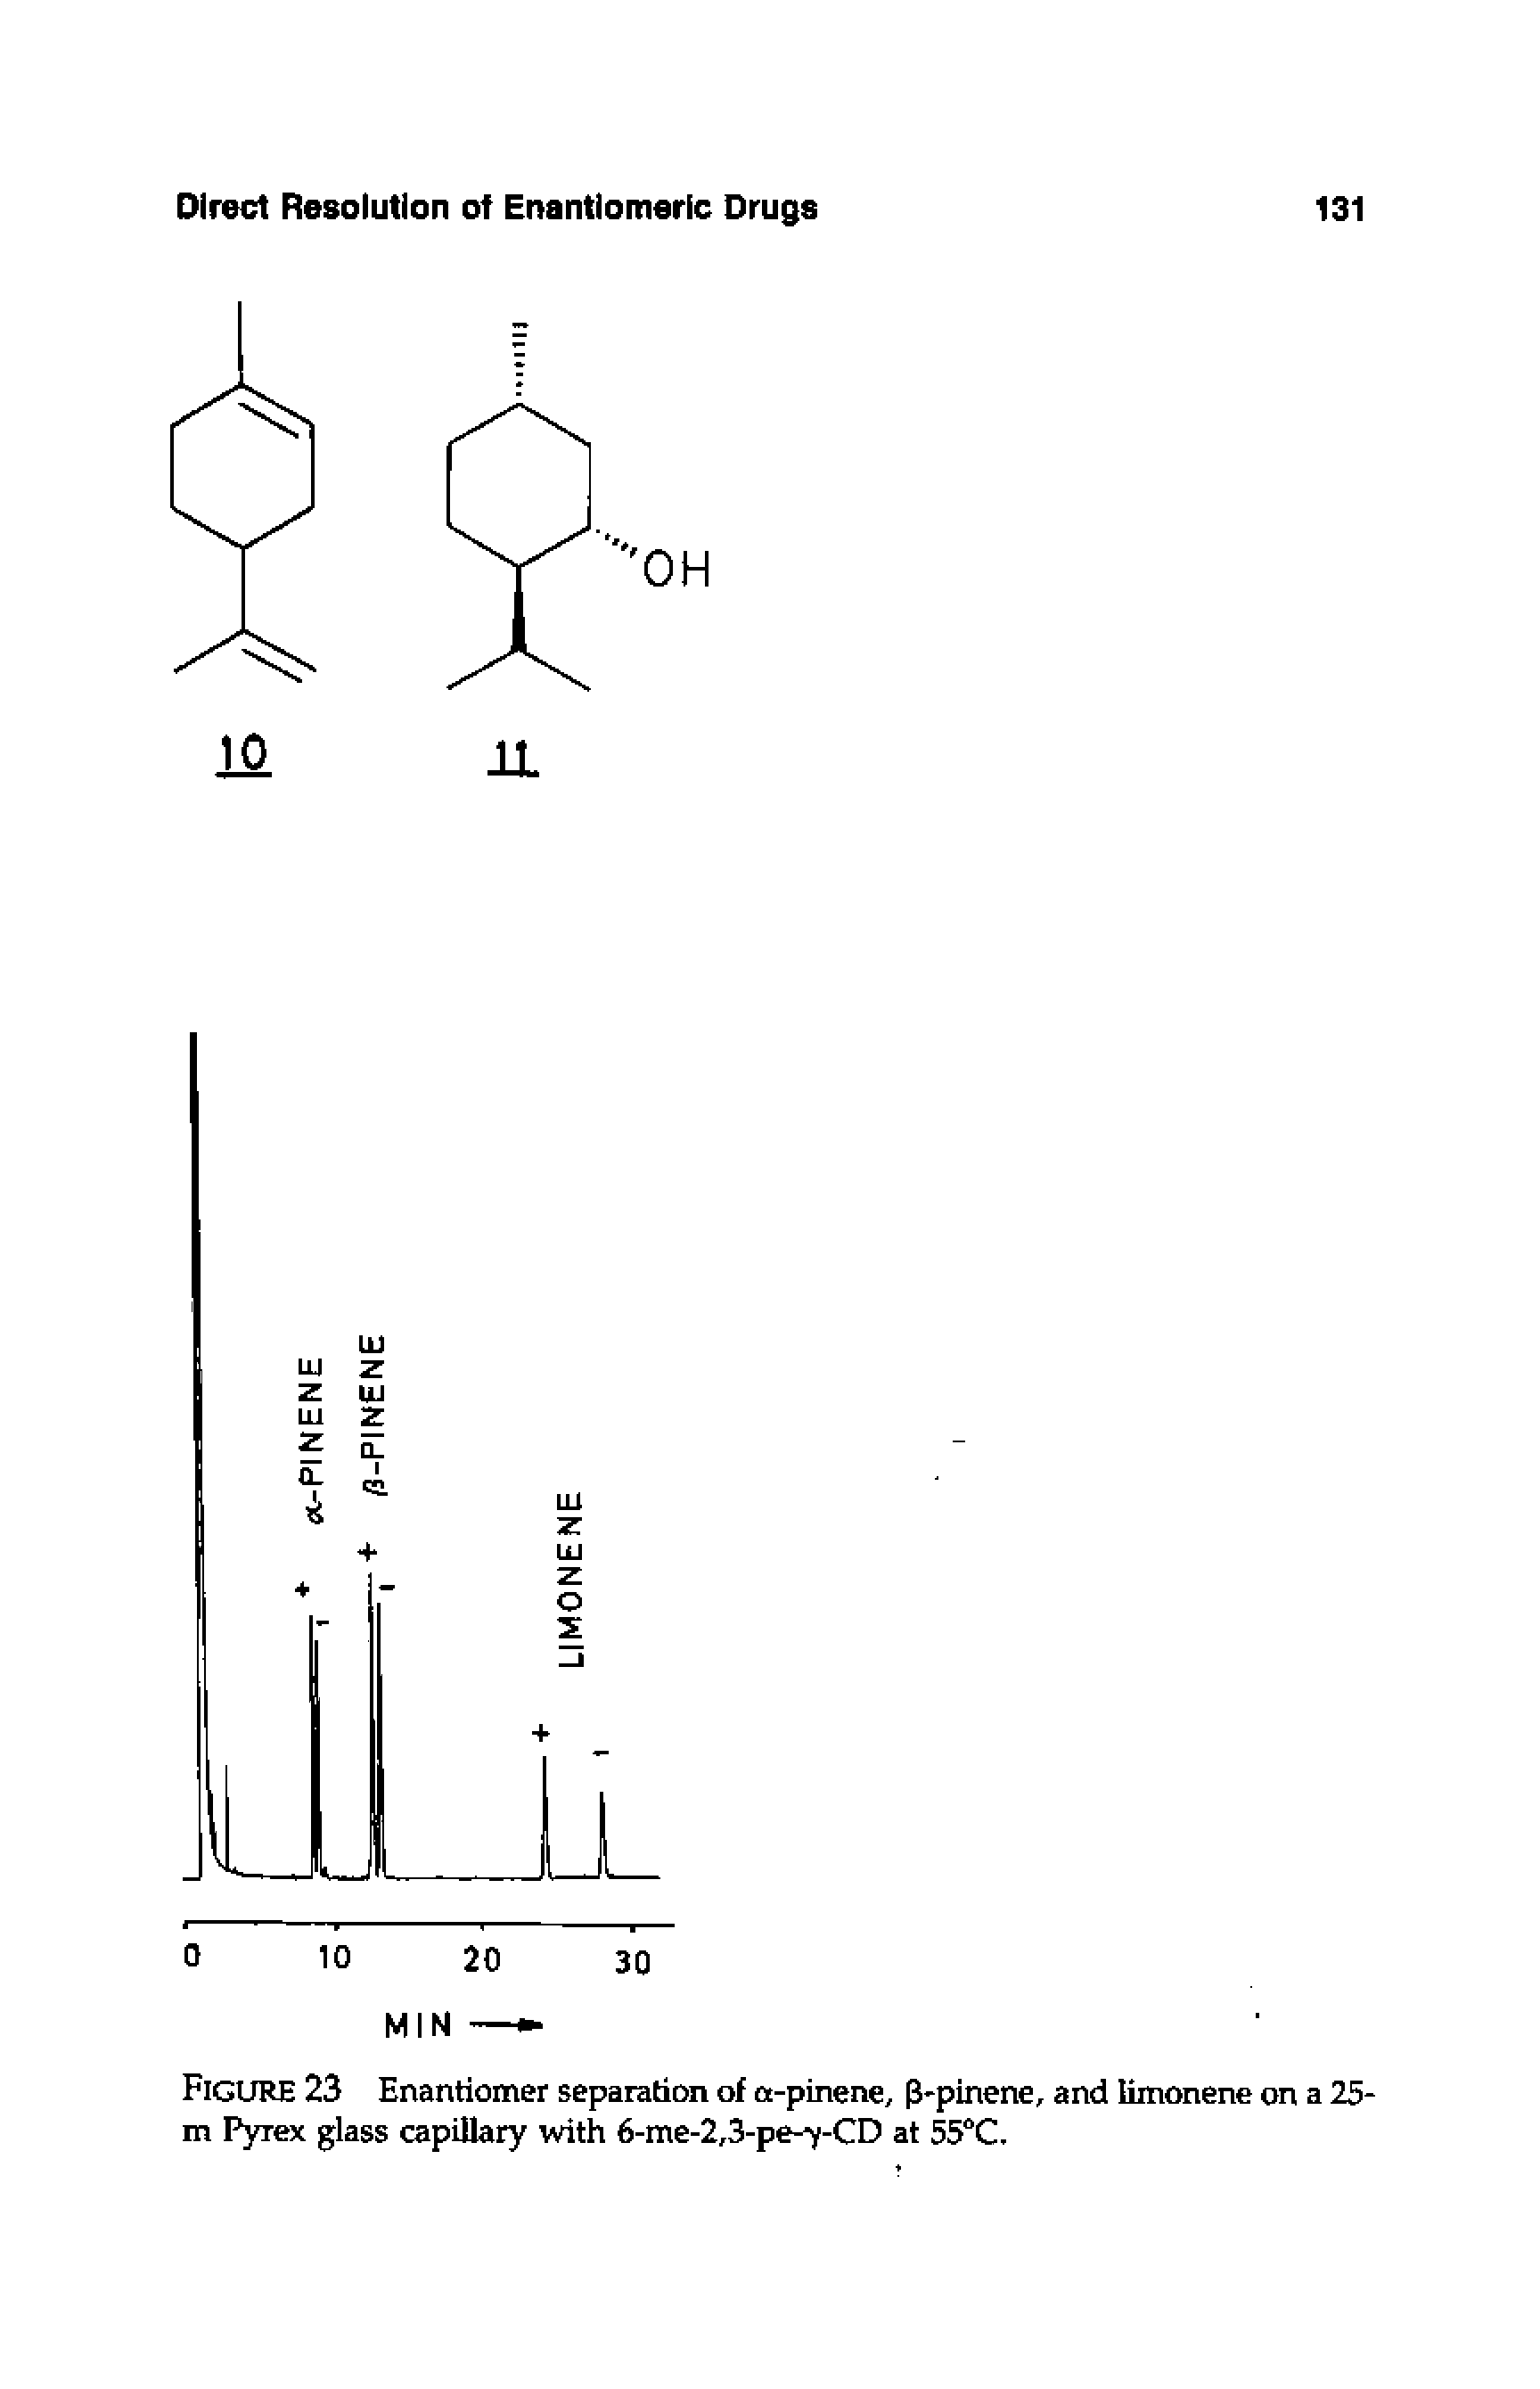 Figure 23 Enanriomer separation of ot-pinene, P-pinene, and limonene on a 25-m Pyrex glass capillary with 6-me-2,3-pe-7-CD at 55 C,...